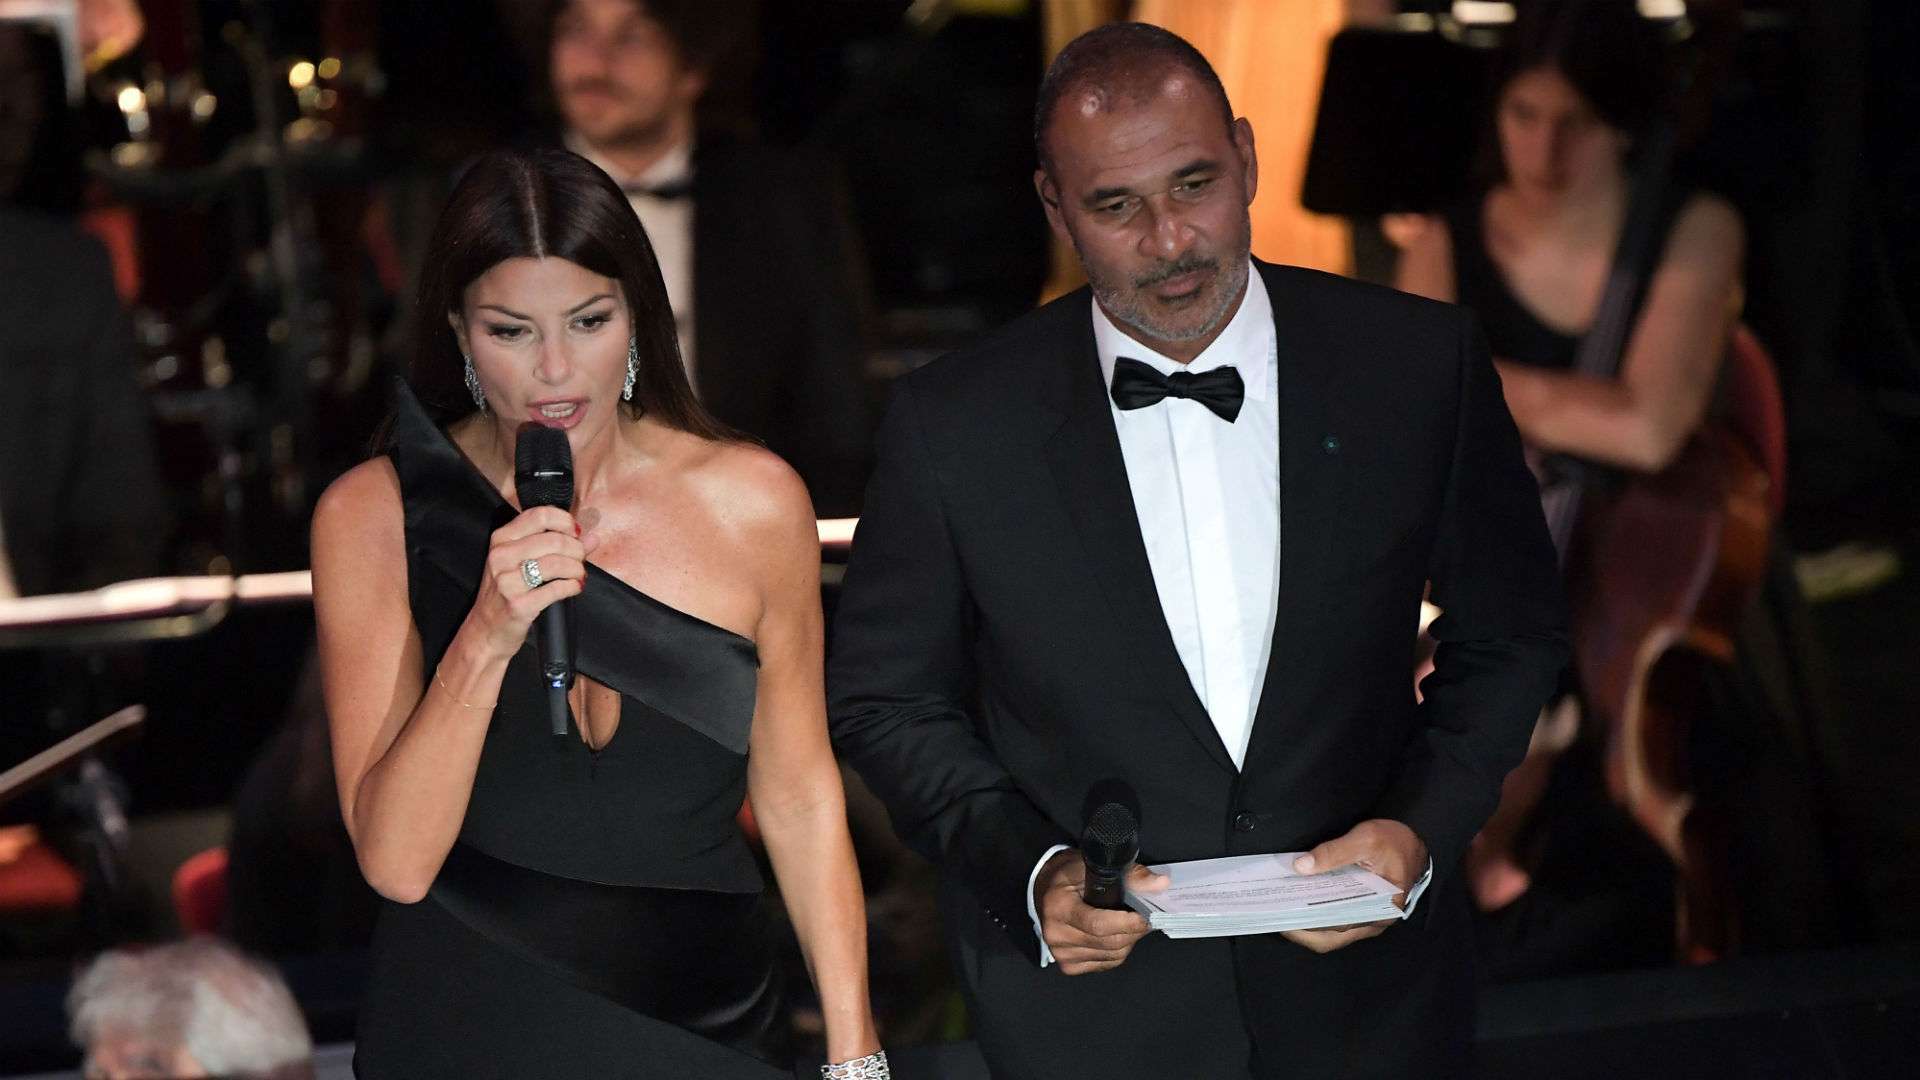 Ilaria D Amico and former Dutch footballer Ruud Gullit speak during The Best FIFA Football Awards ceremony